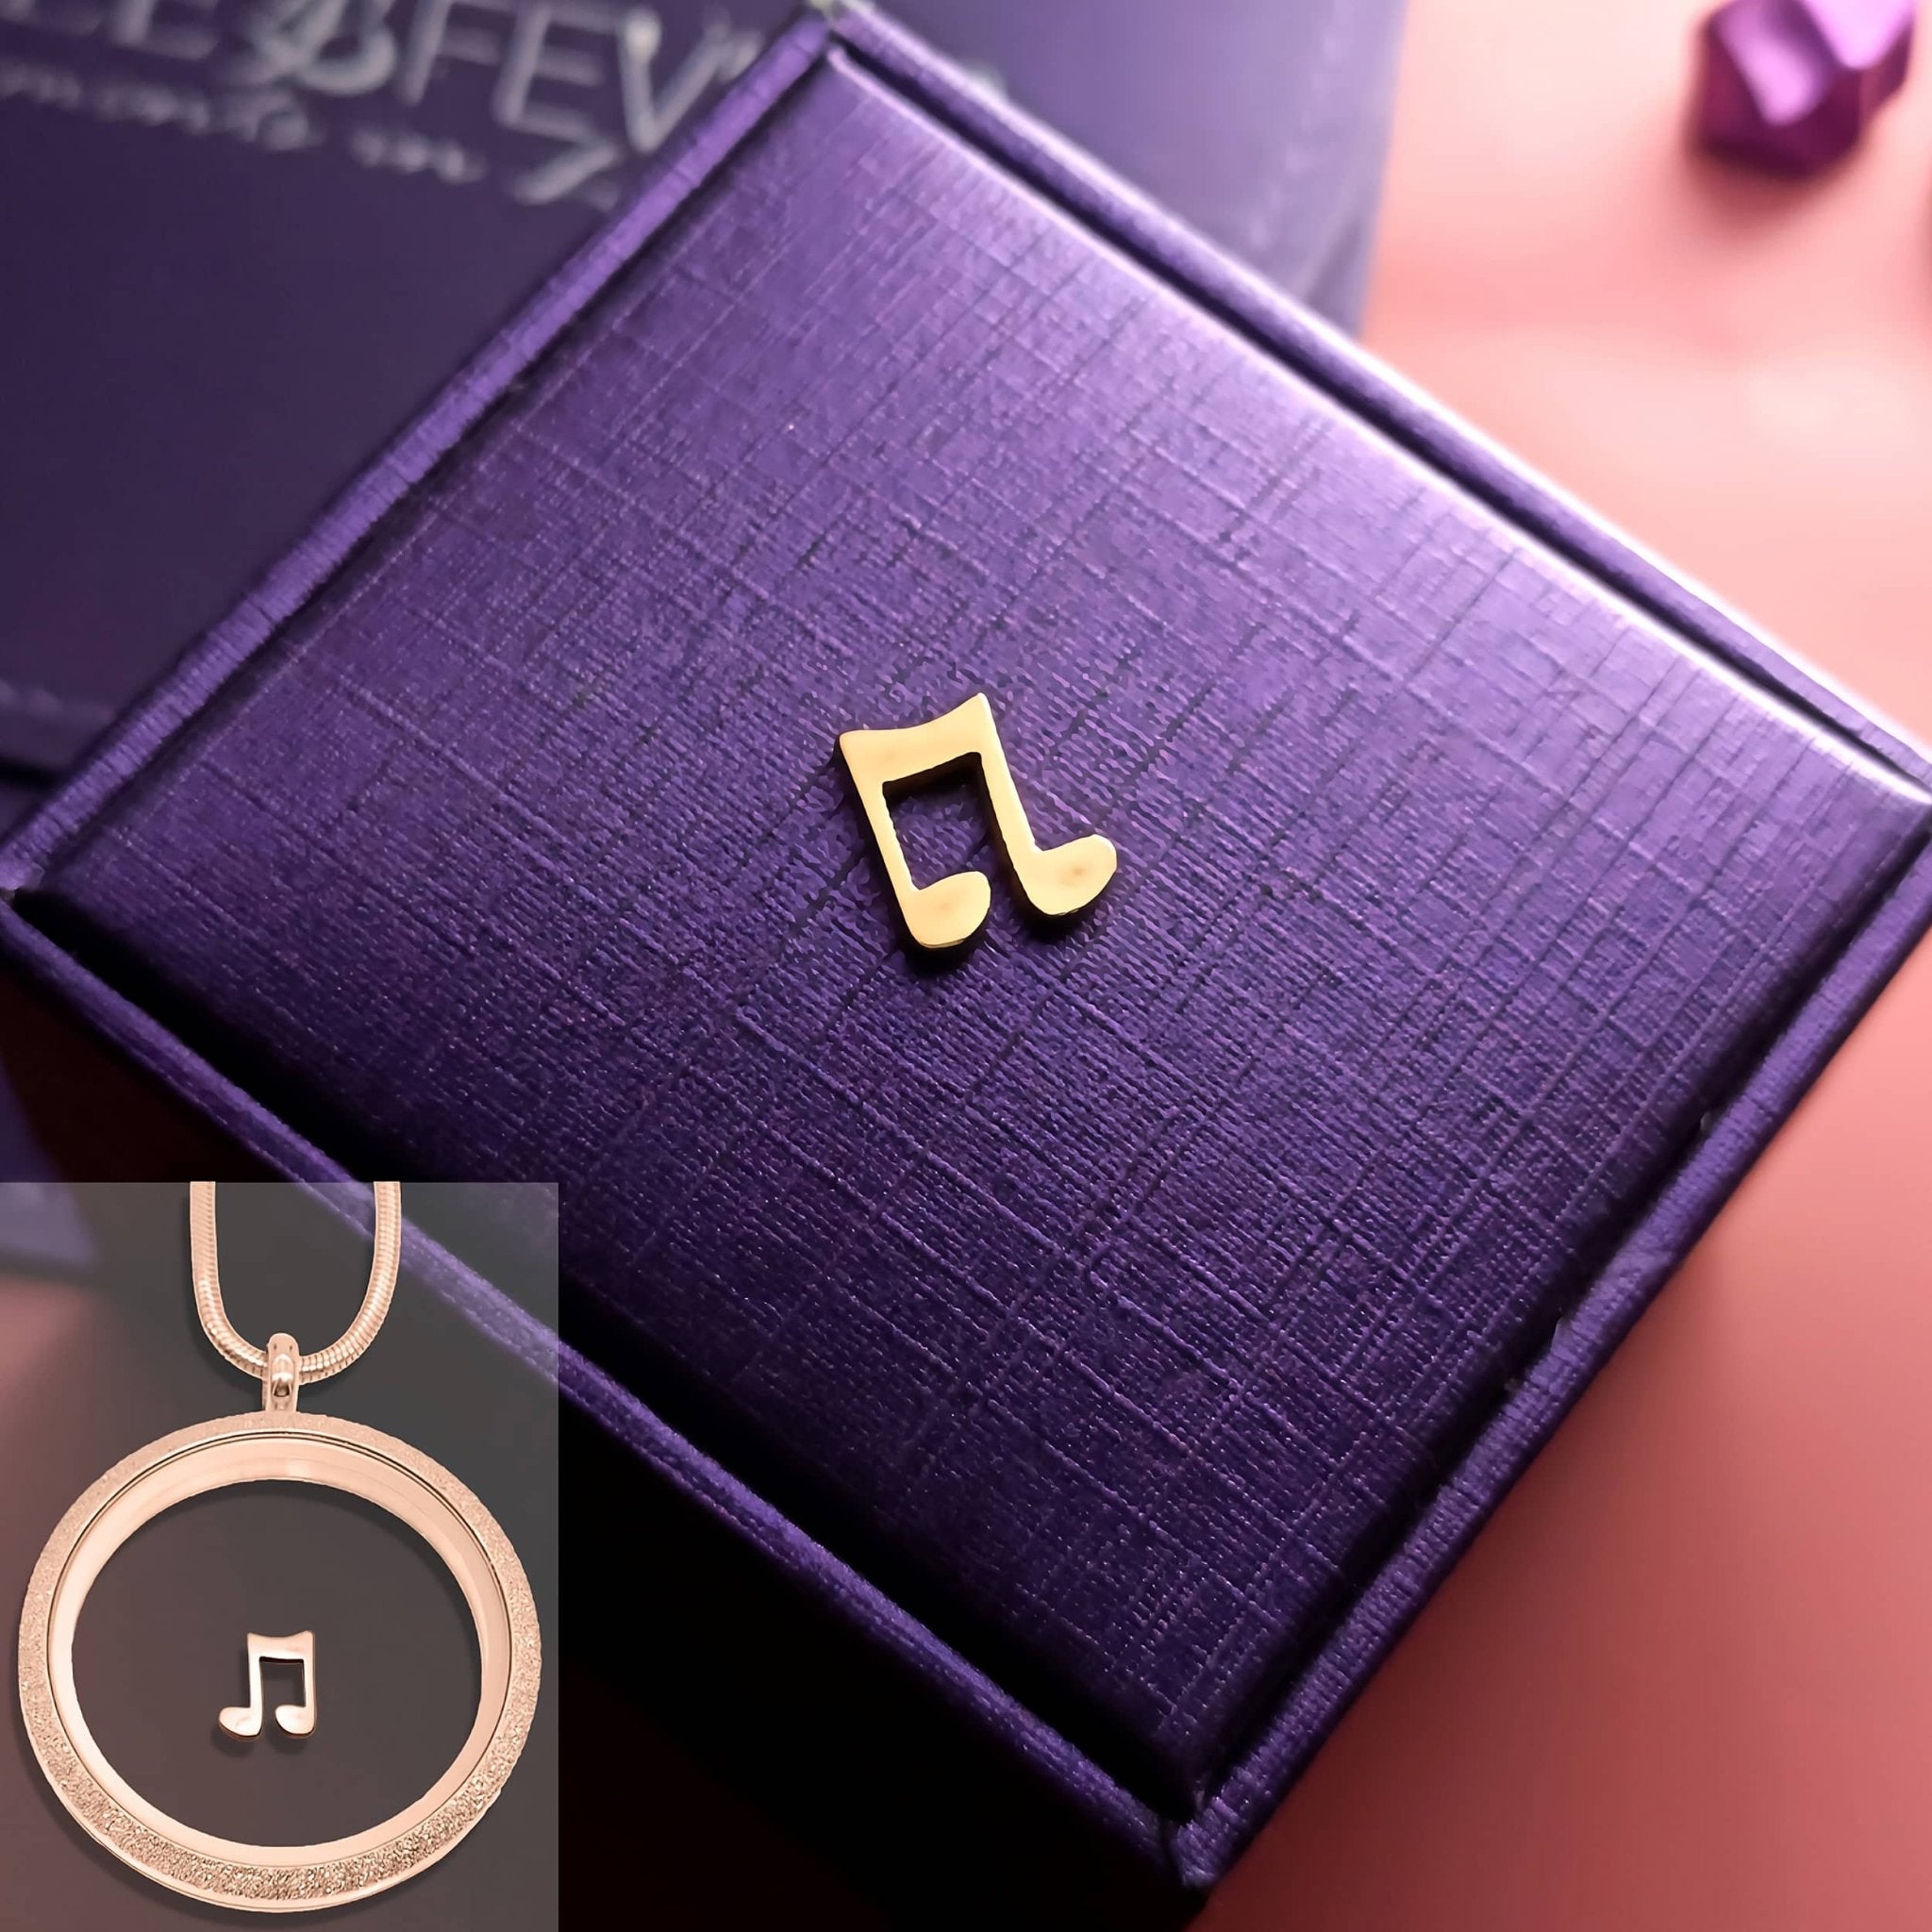 Musical Note Charm for Dream Locket - Floating Dream Lockets by Belle Fever